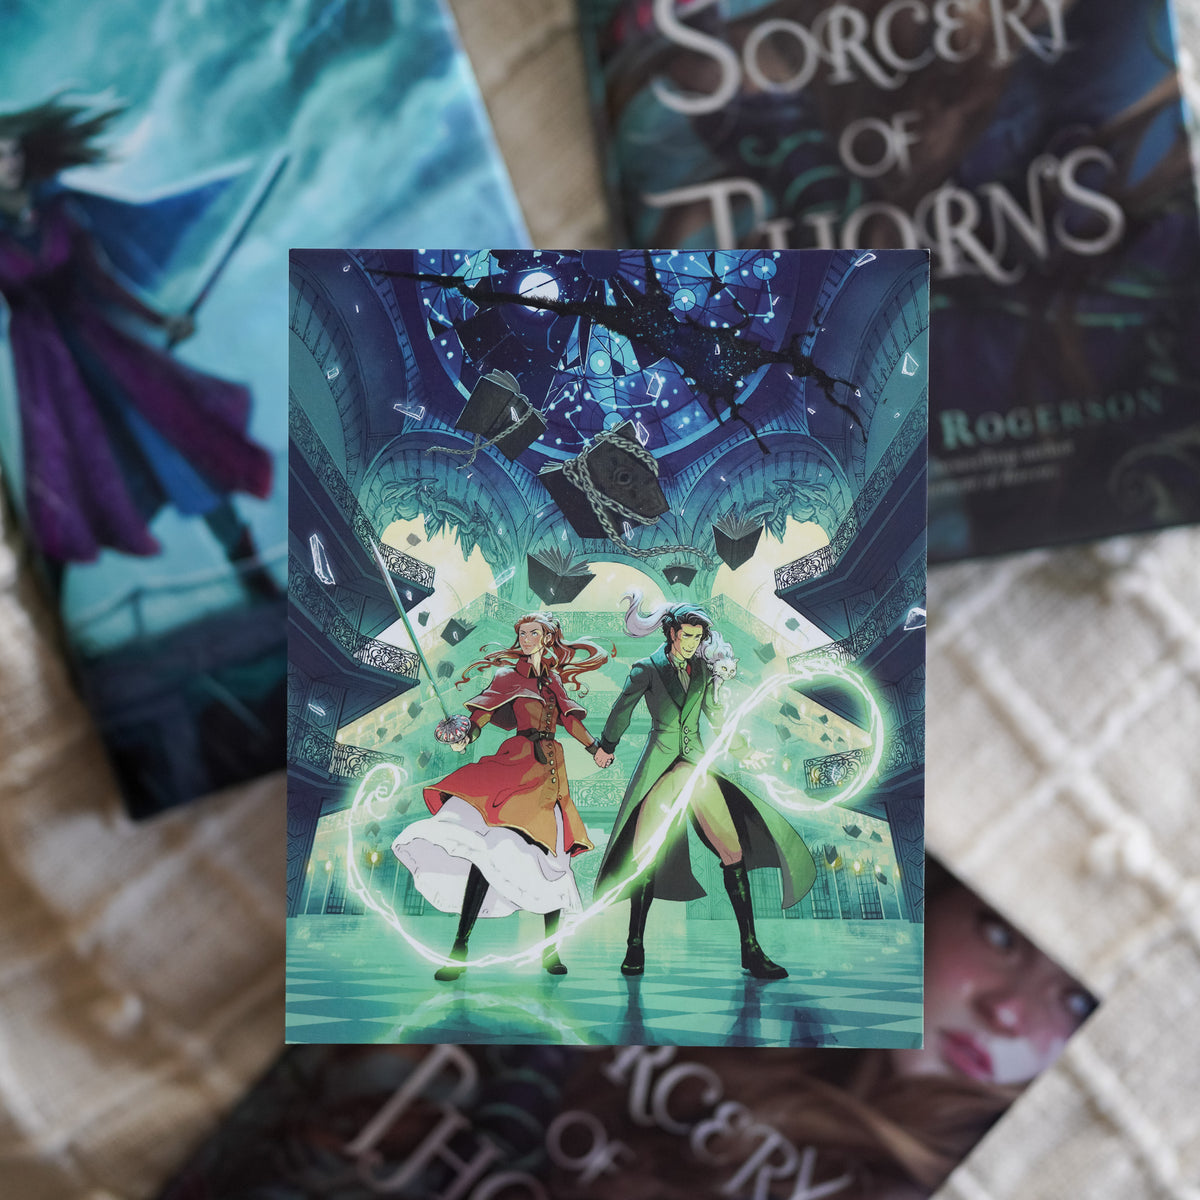 Sorcery of Thorns Art Print includes Elisabeth and Nathaniel with grimoires flying around them